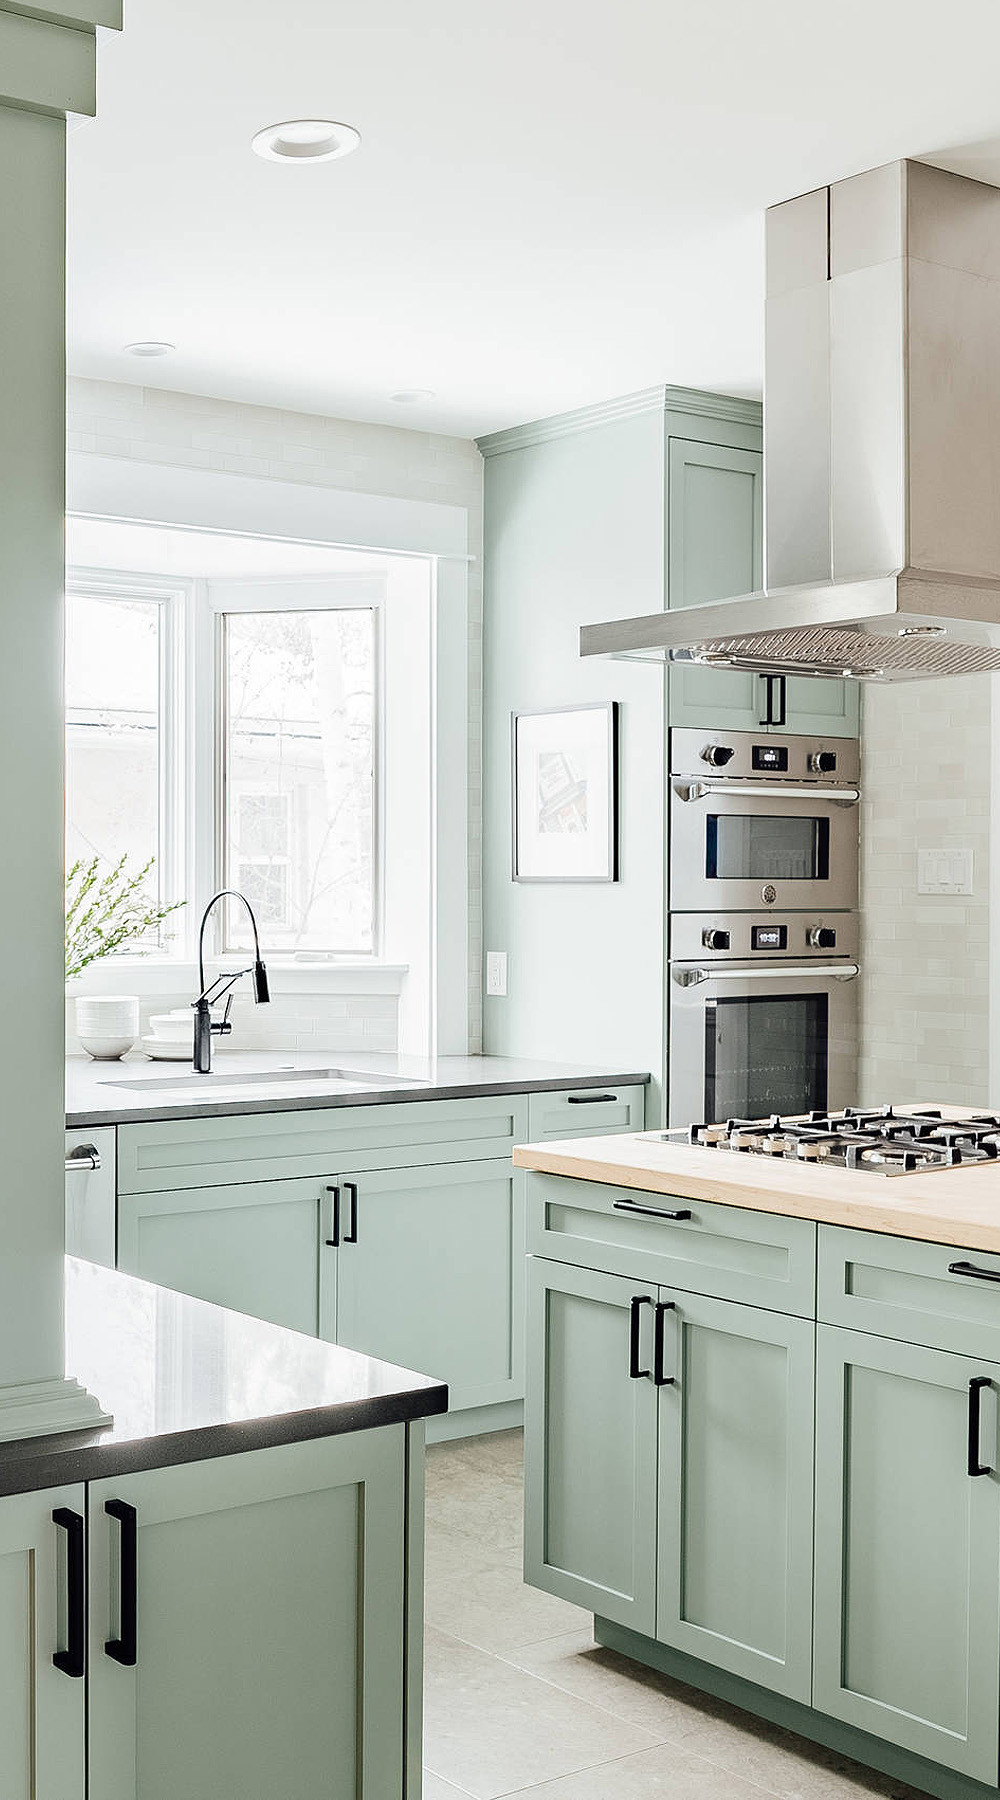 Amy'S Kitchen White City
 34 Top Green Kitchen Cabinets " Good for Kitchen